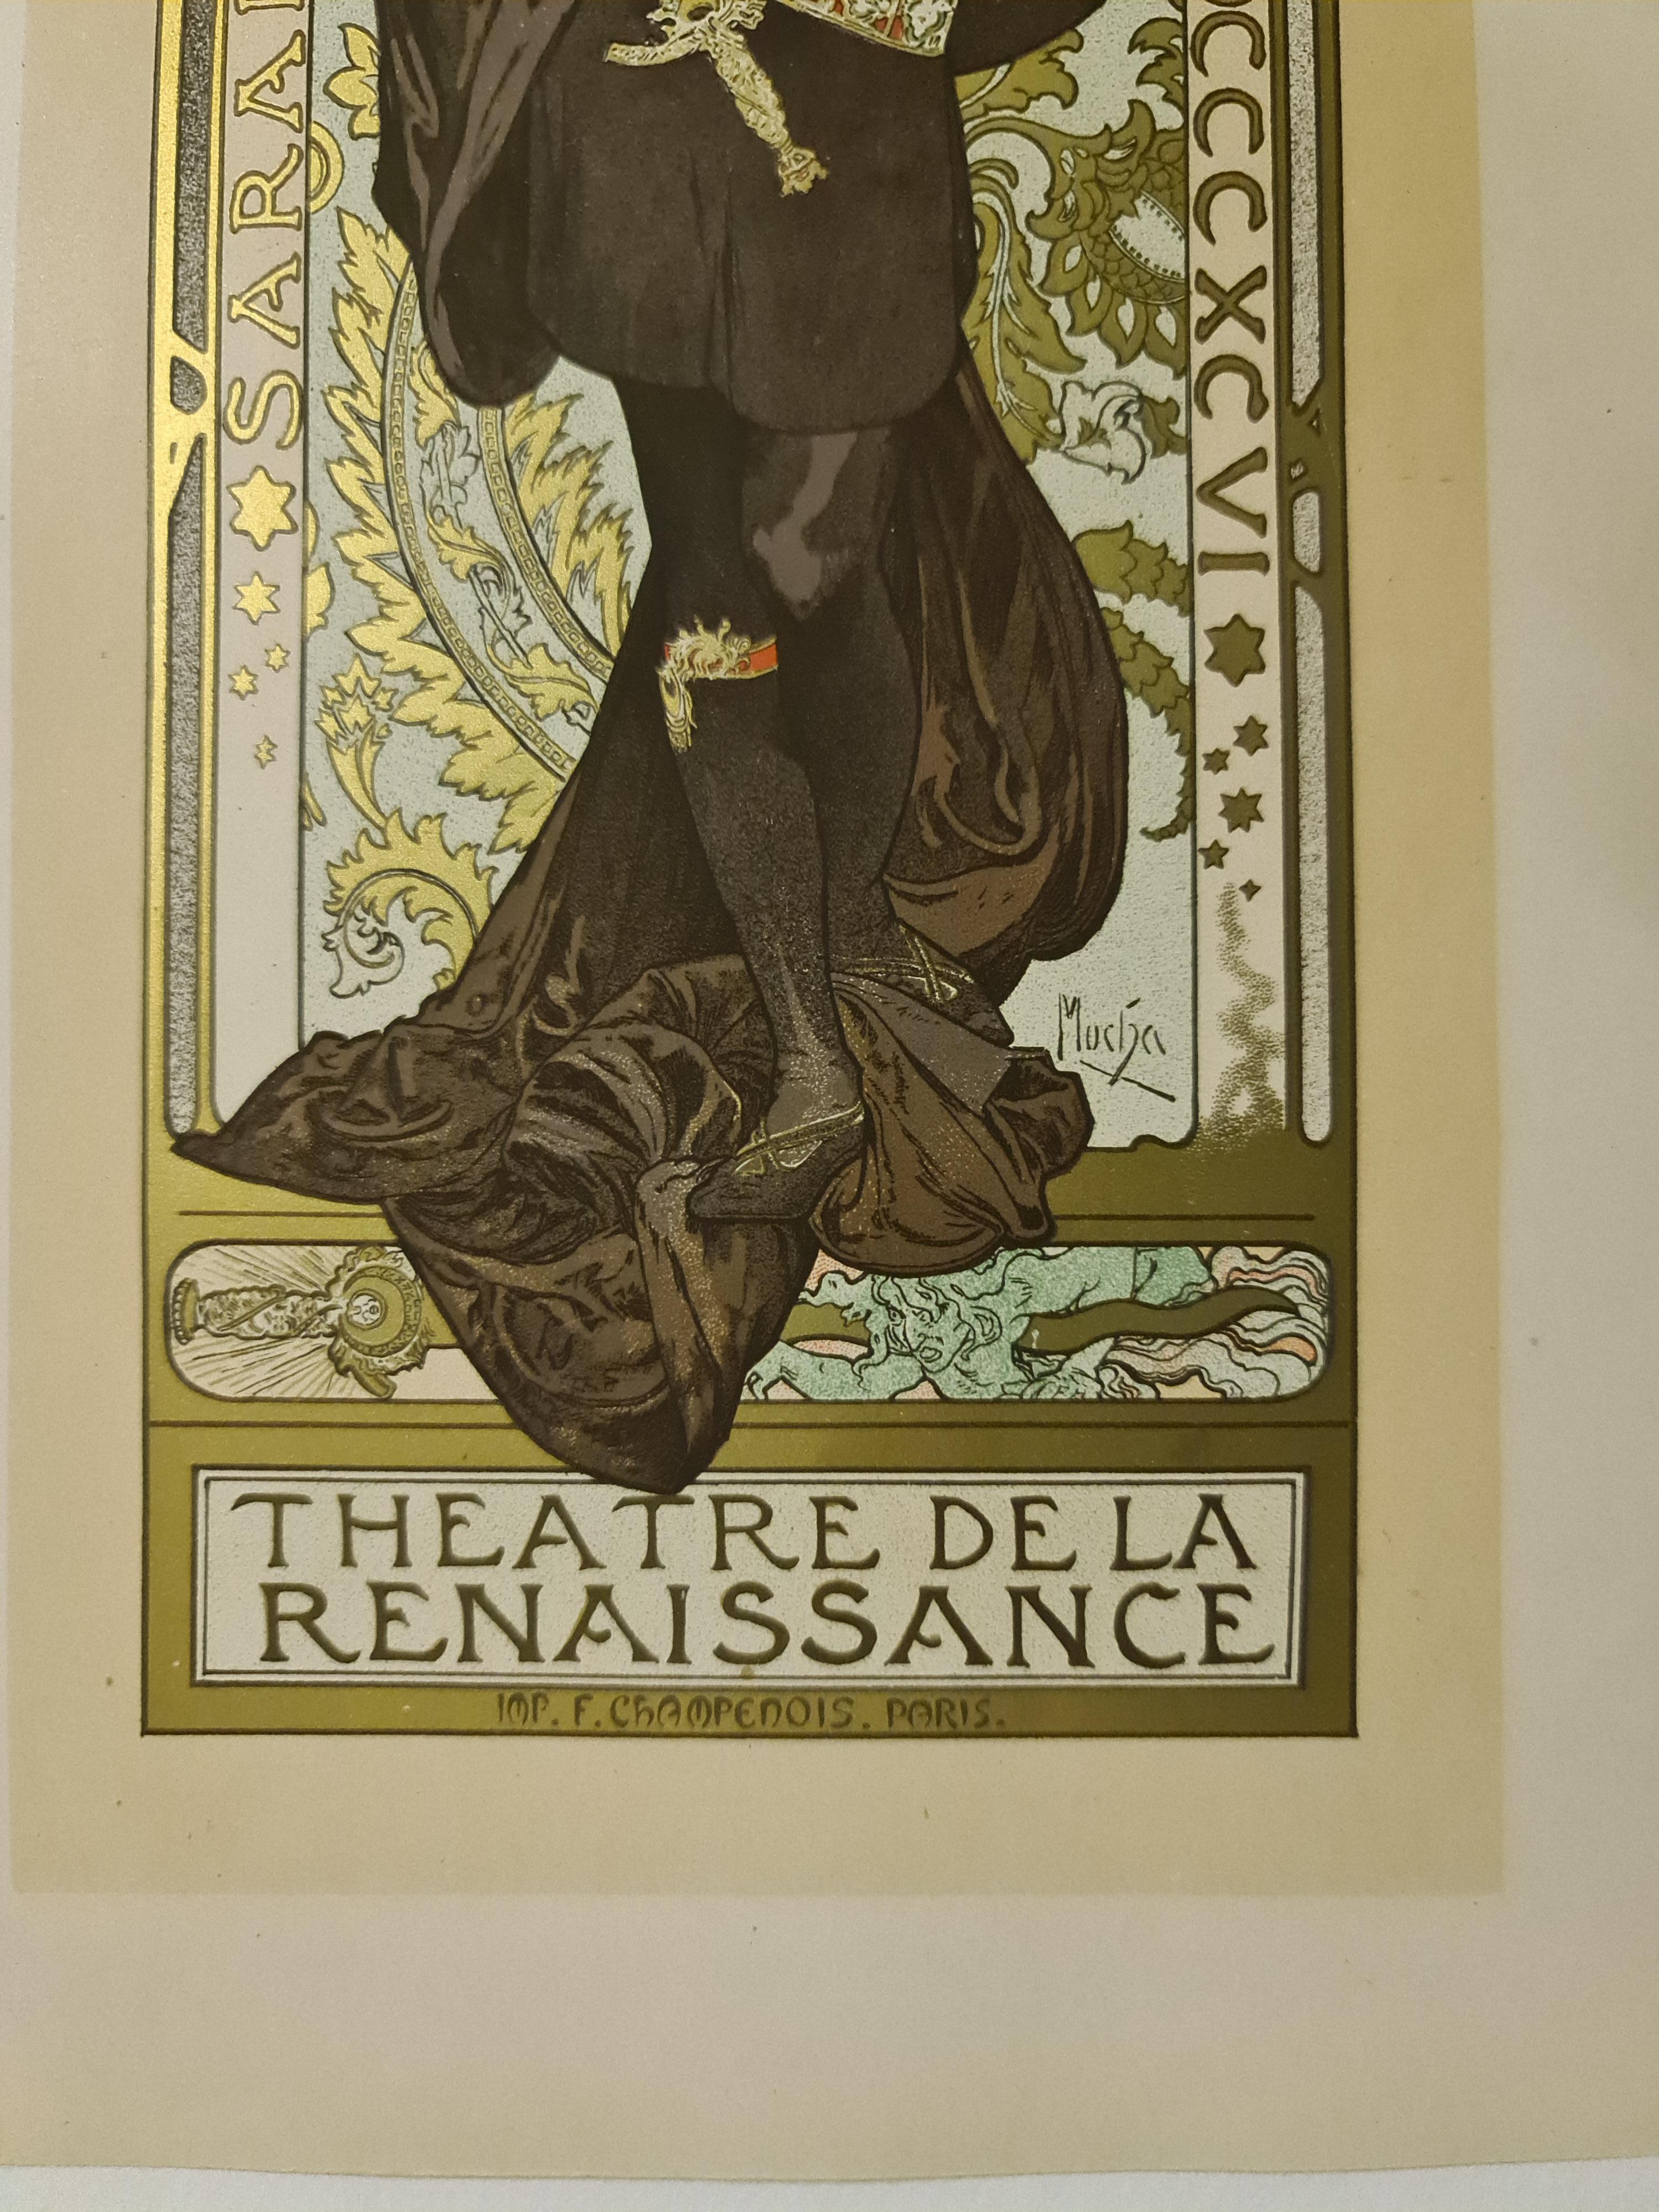 Alphonse Mucha Lorenzaccio - Sarah Bernhardt,1898 Original Lithograph in colors (PL. 114).
Printed by Chaix in  Paris and  published by Les Maîtres de l'Affiche.
This plate is from the famous set 